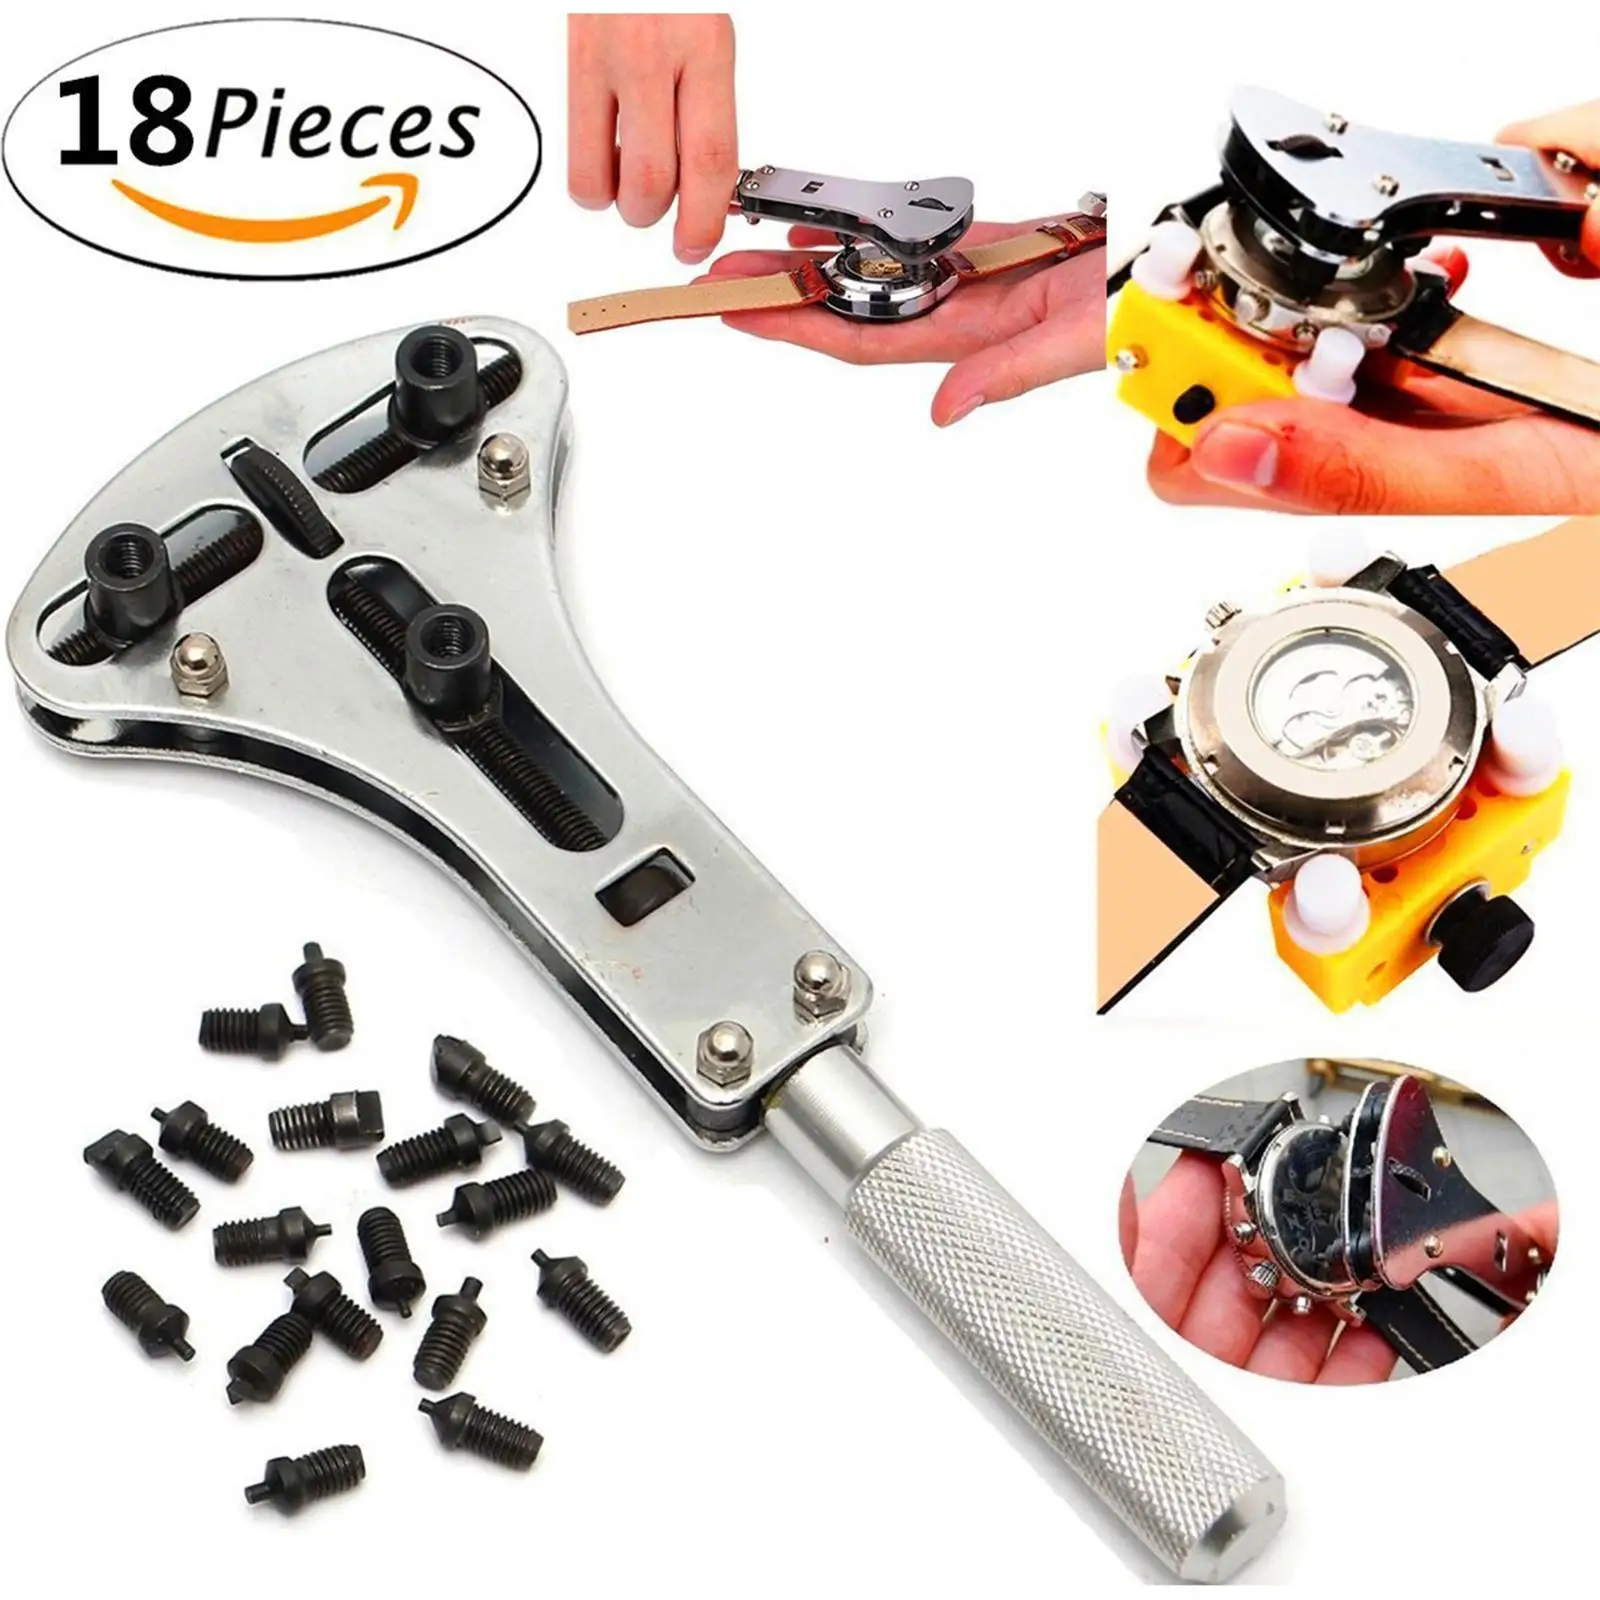 Adjustable Watch  Case Wrench Opener Remover Repair Tool with Replaceable Parts